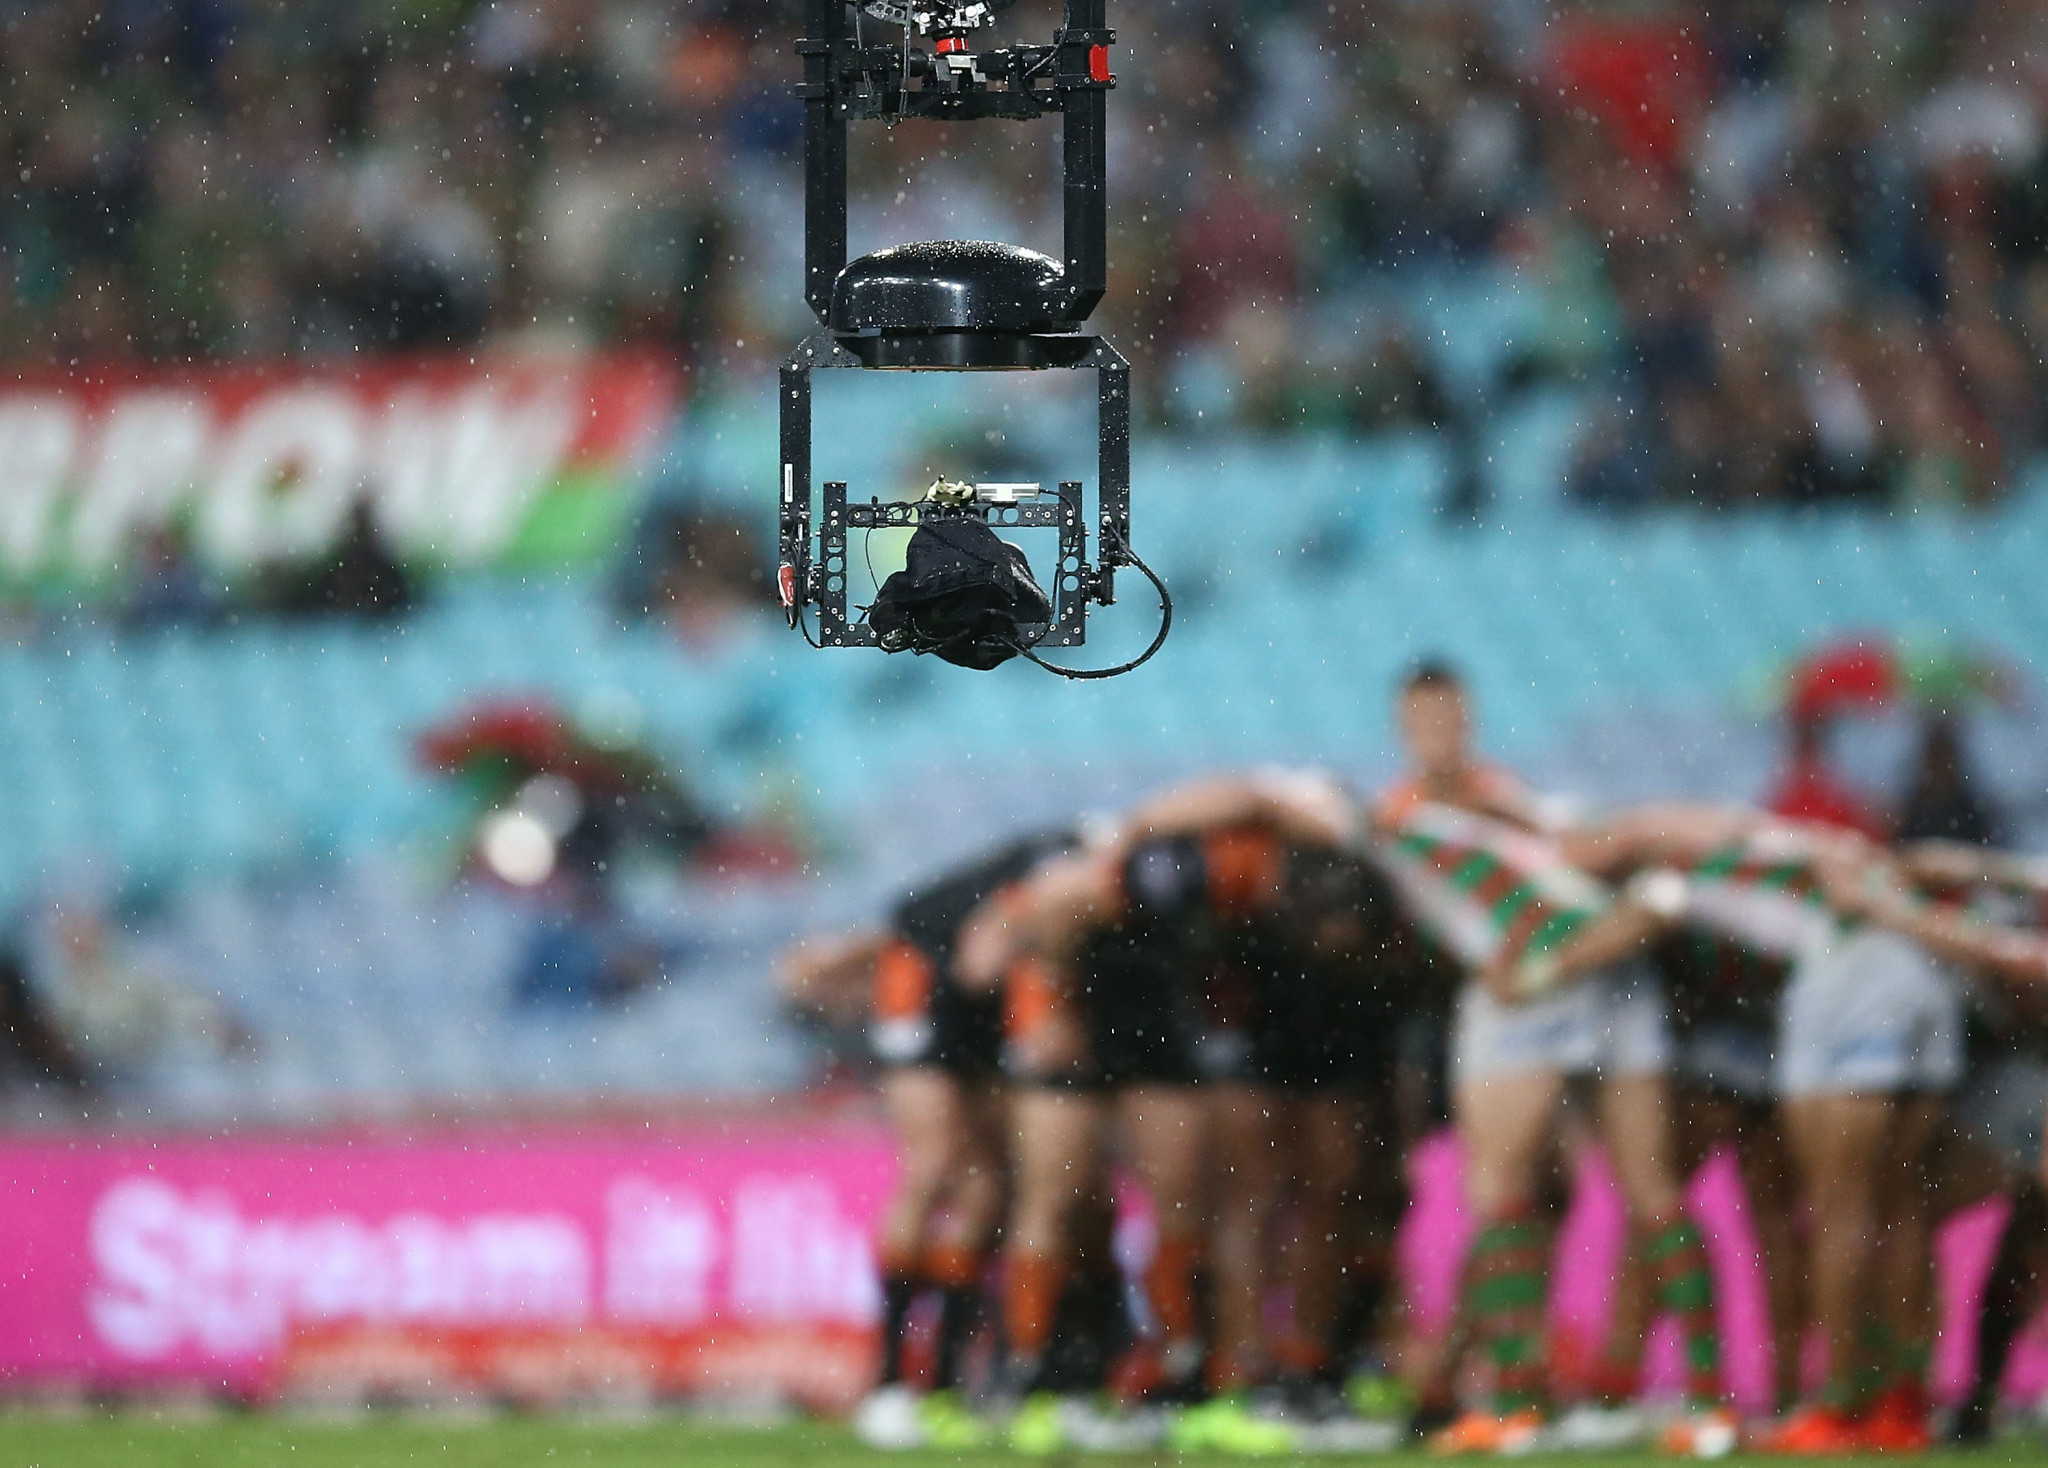 Rugby League World Cup 2021 appoints RDA to distribute international media rights